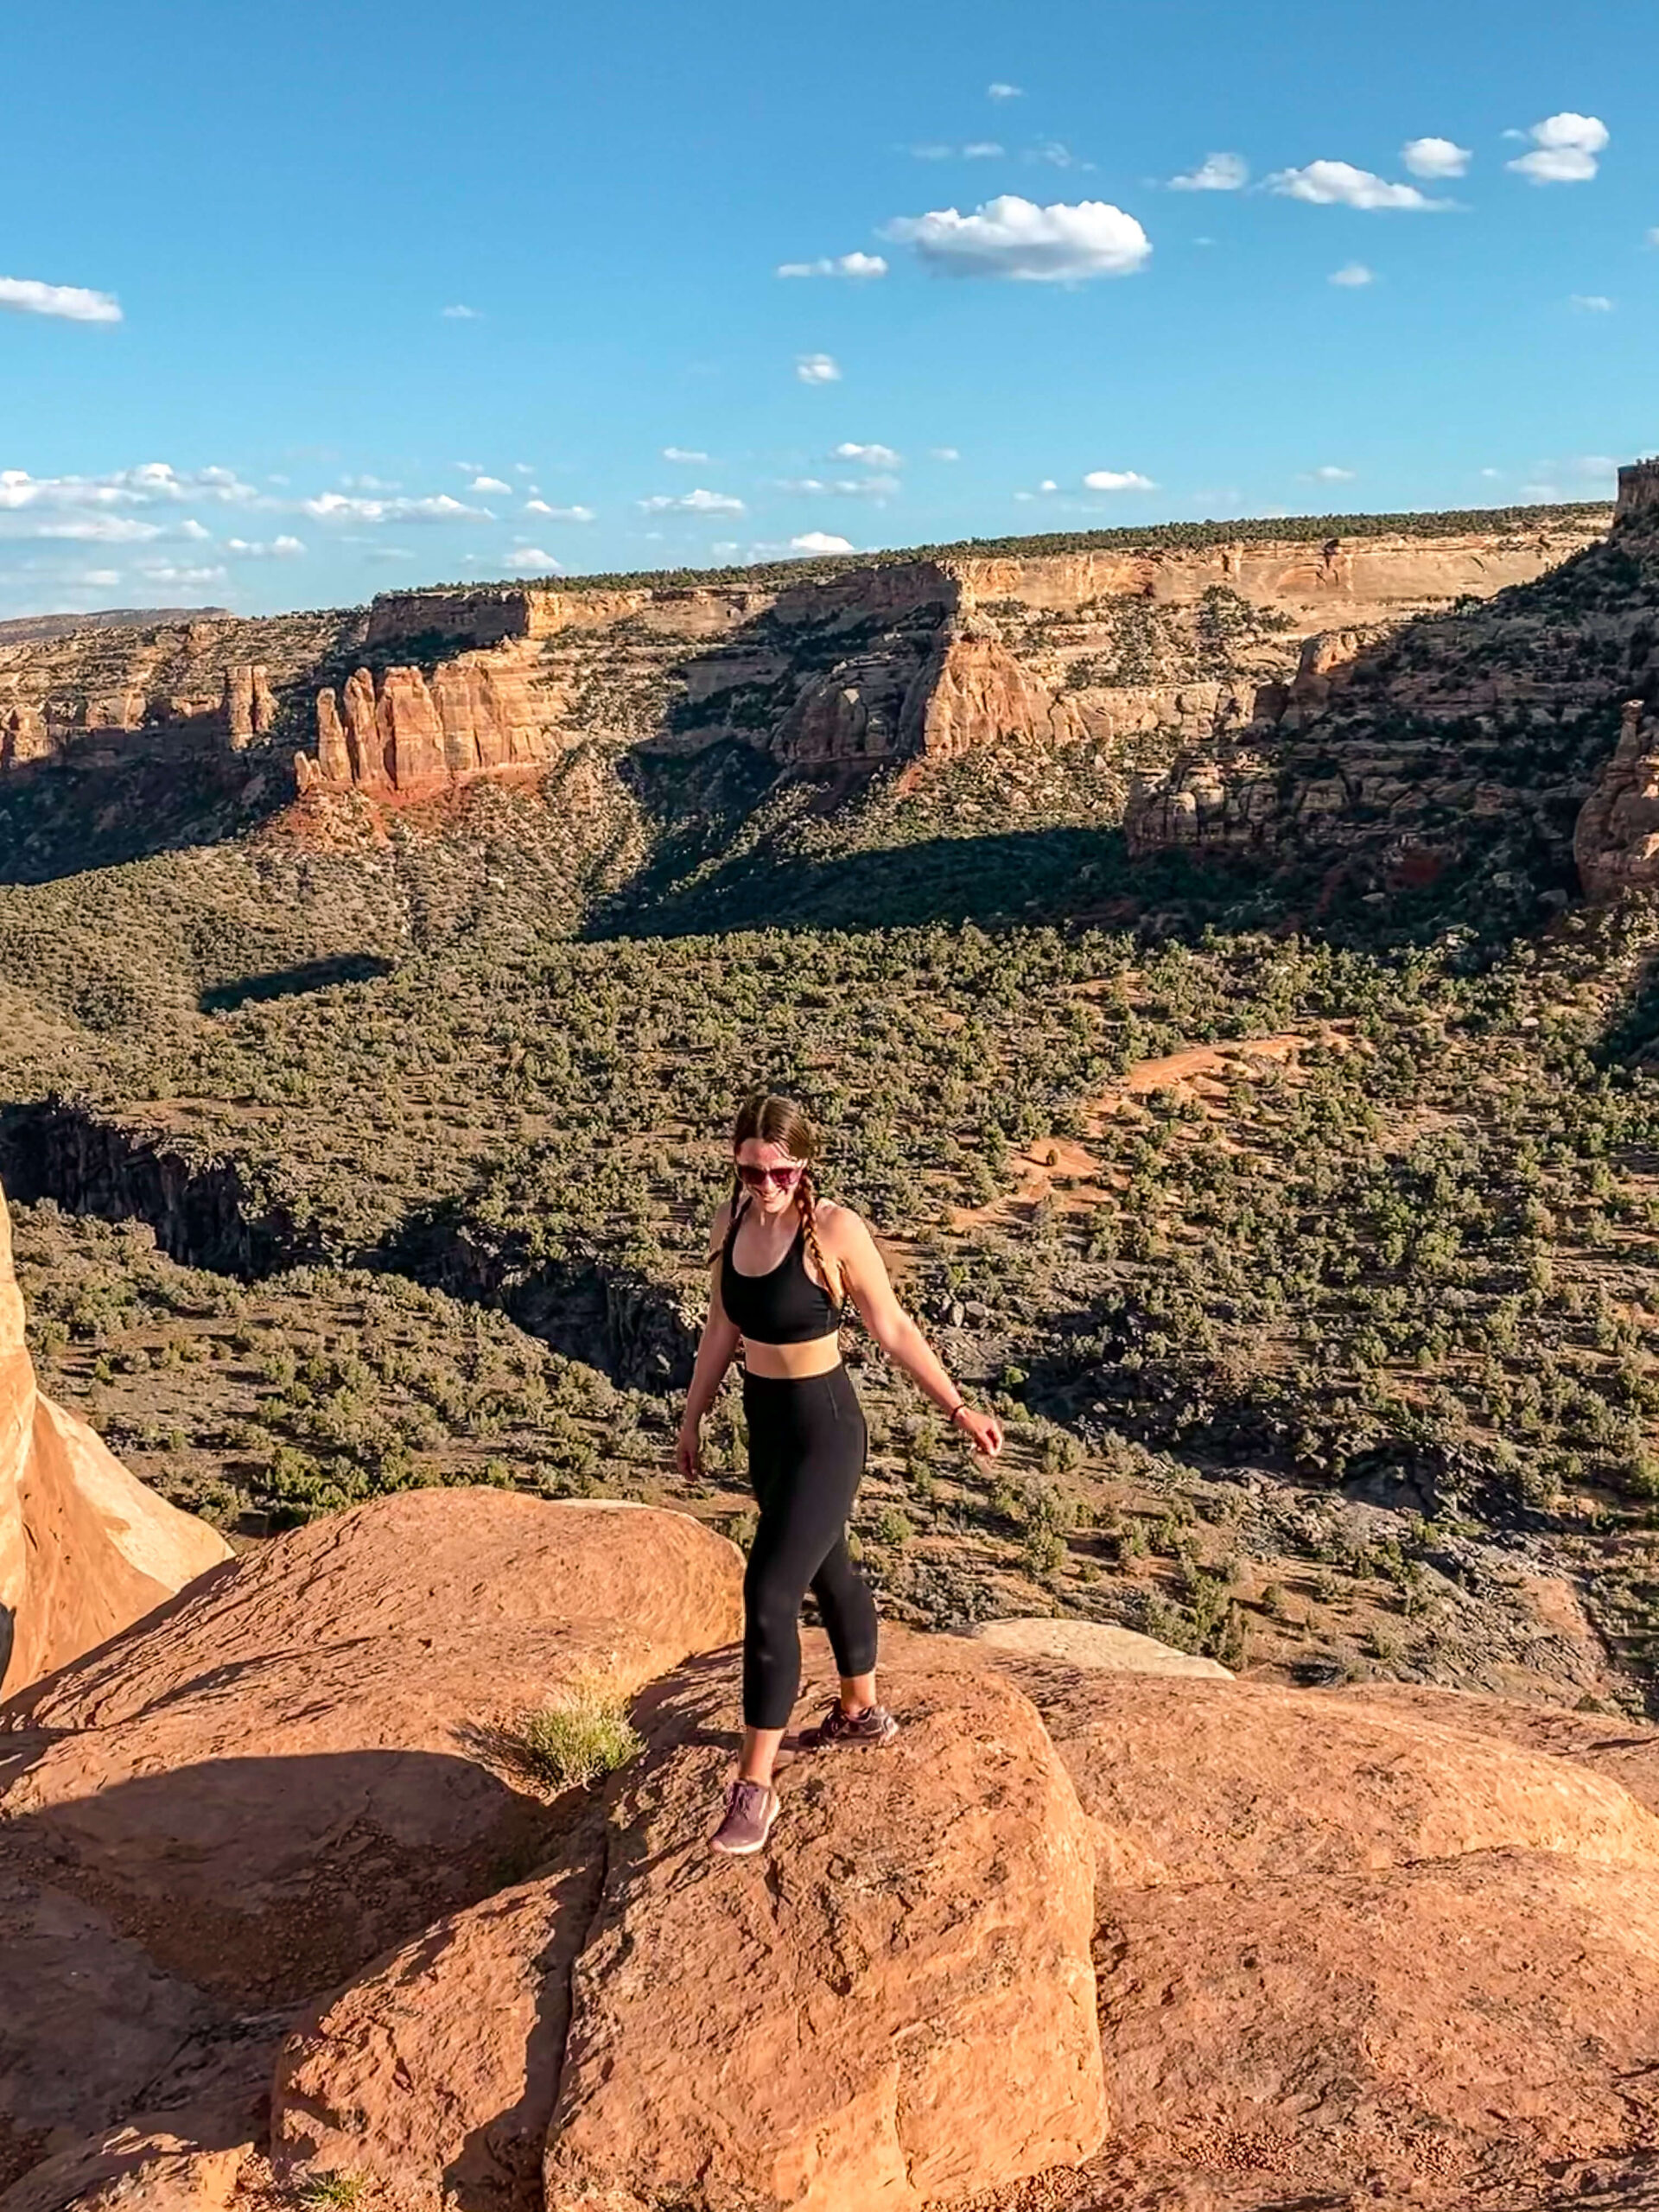 Woman wearing a black sports bra and leggings stands on a sandstone rock overlooking Ute Canyon in Colorado National Monument.